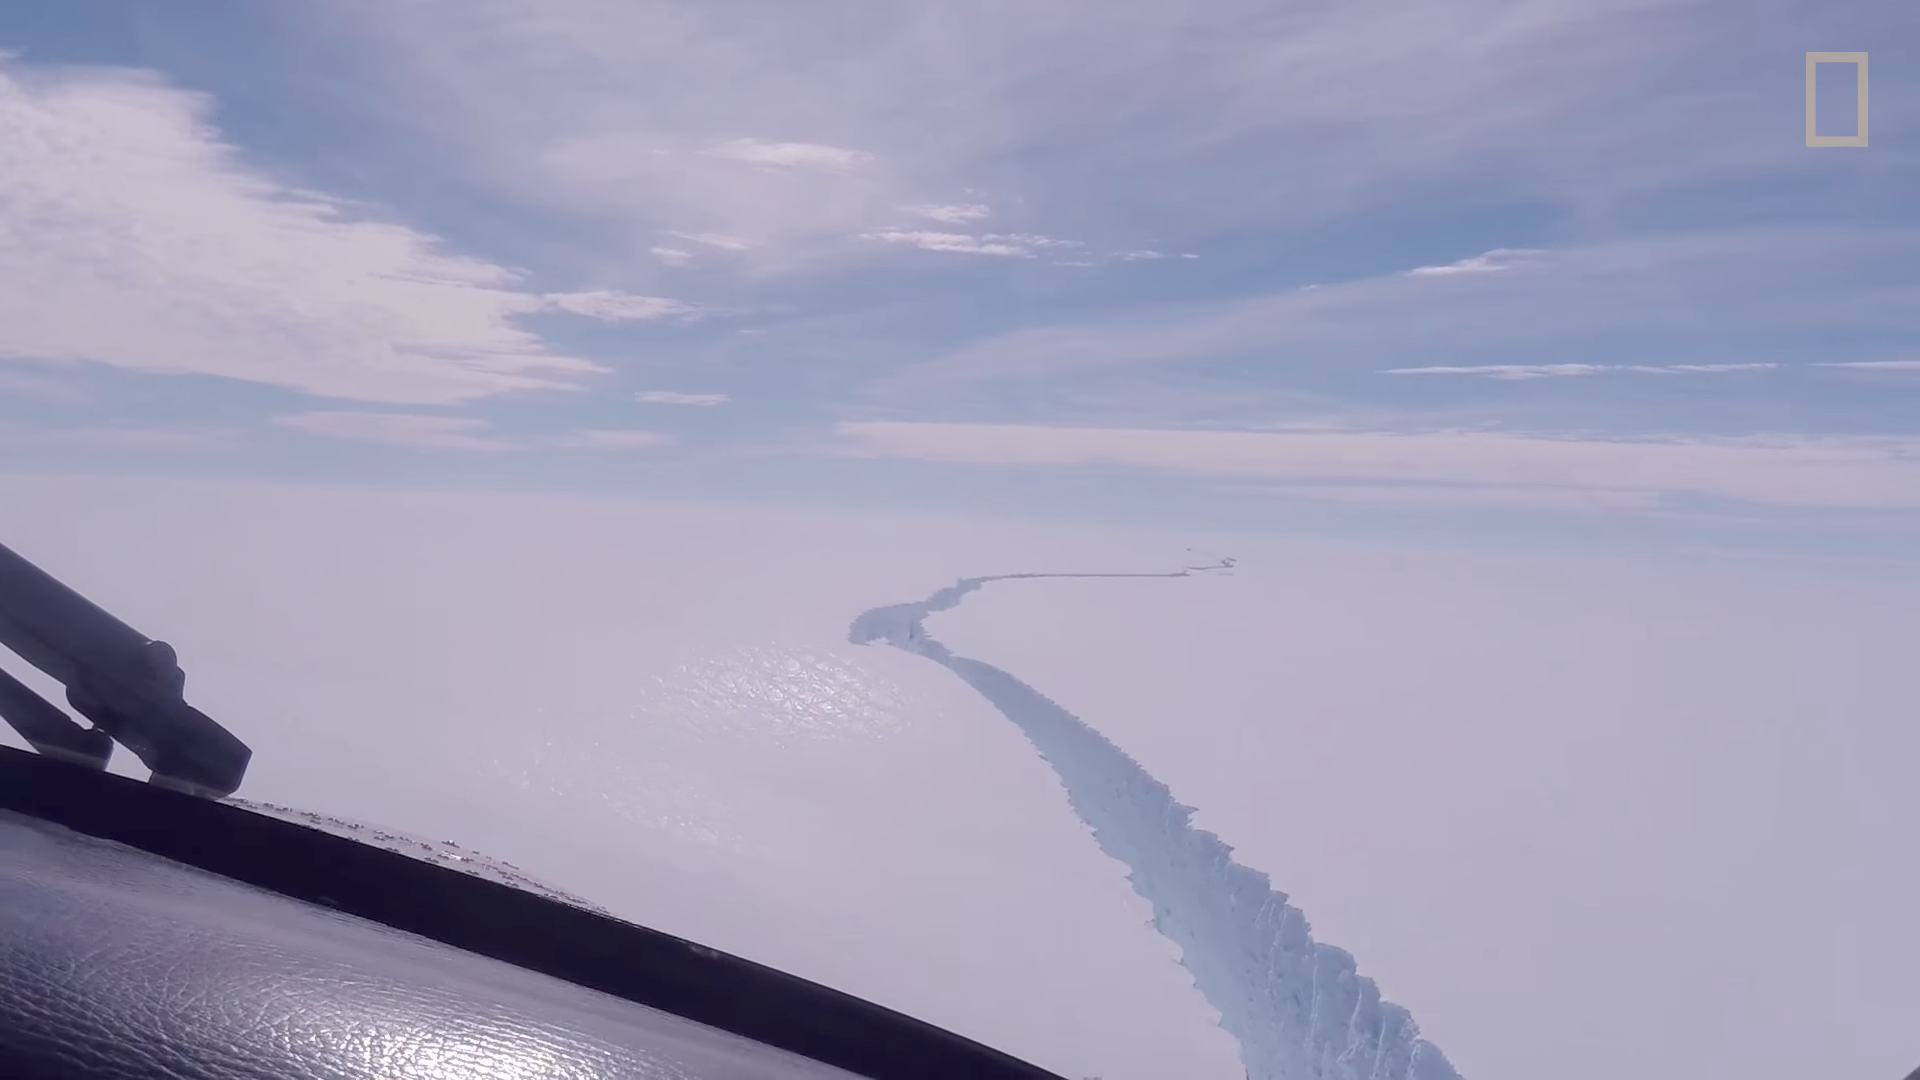 The Larsen C Ice Shelf in West Antarctica. Photo by: National Geographic / YouTube